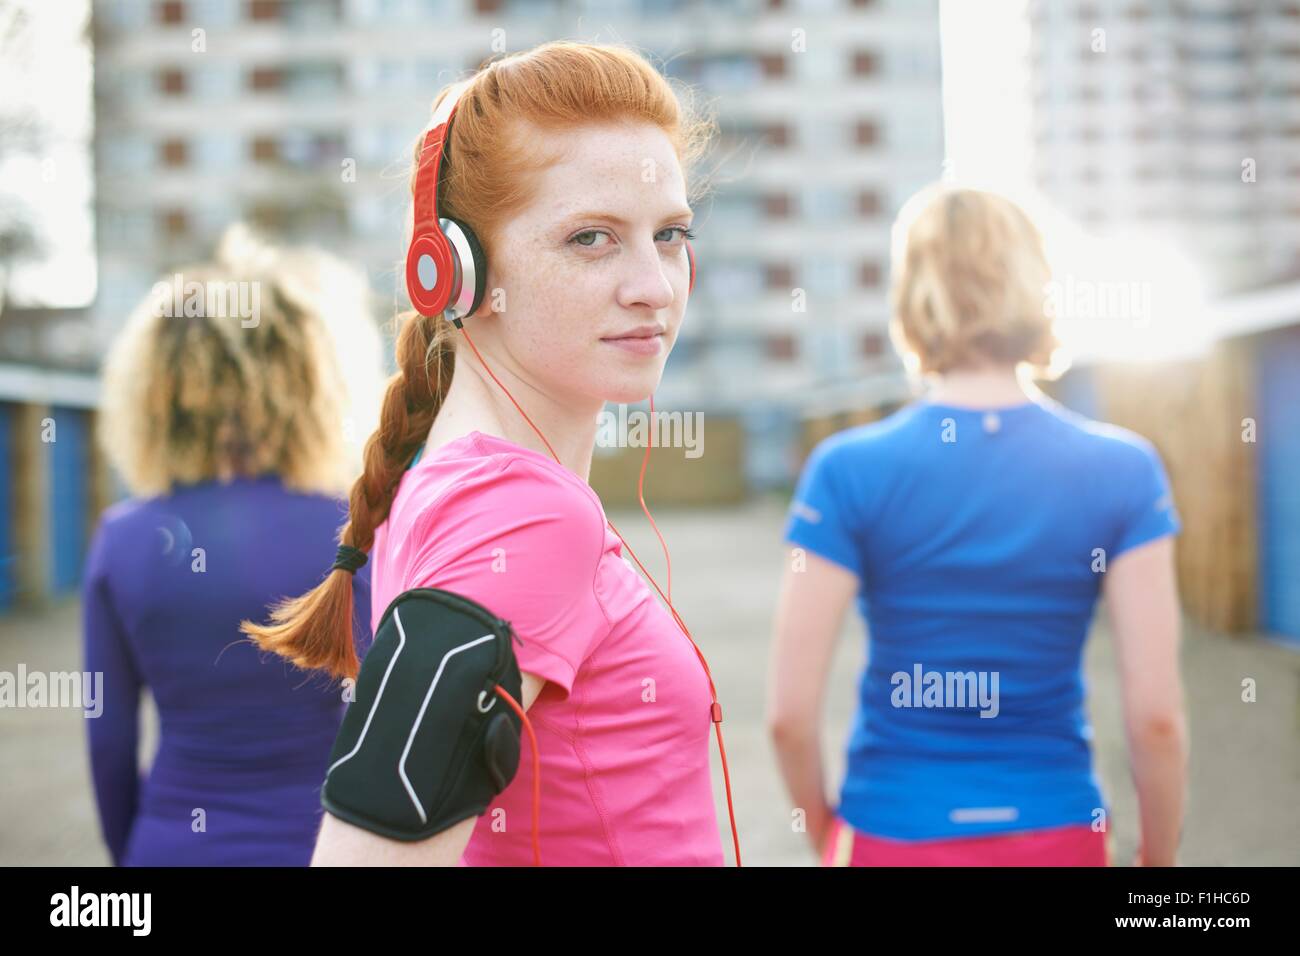 Portrait of woman wearing armband and headphones before exercise looking over shoulder at camera Stock Photo